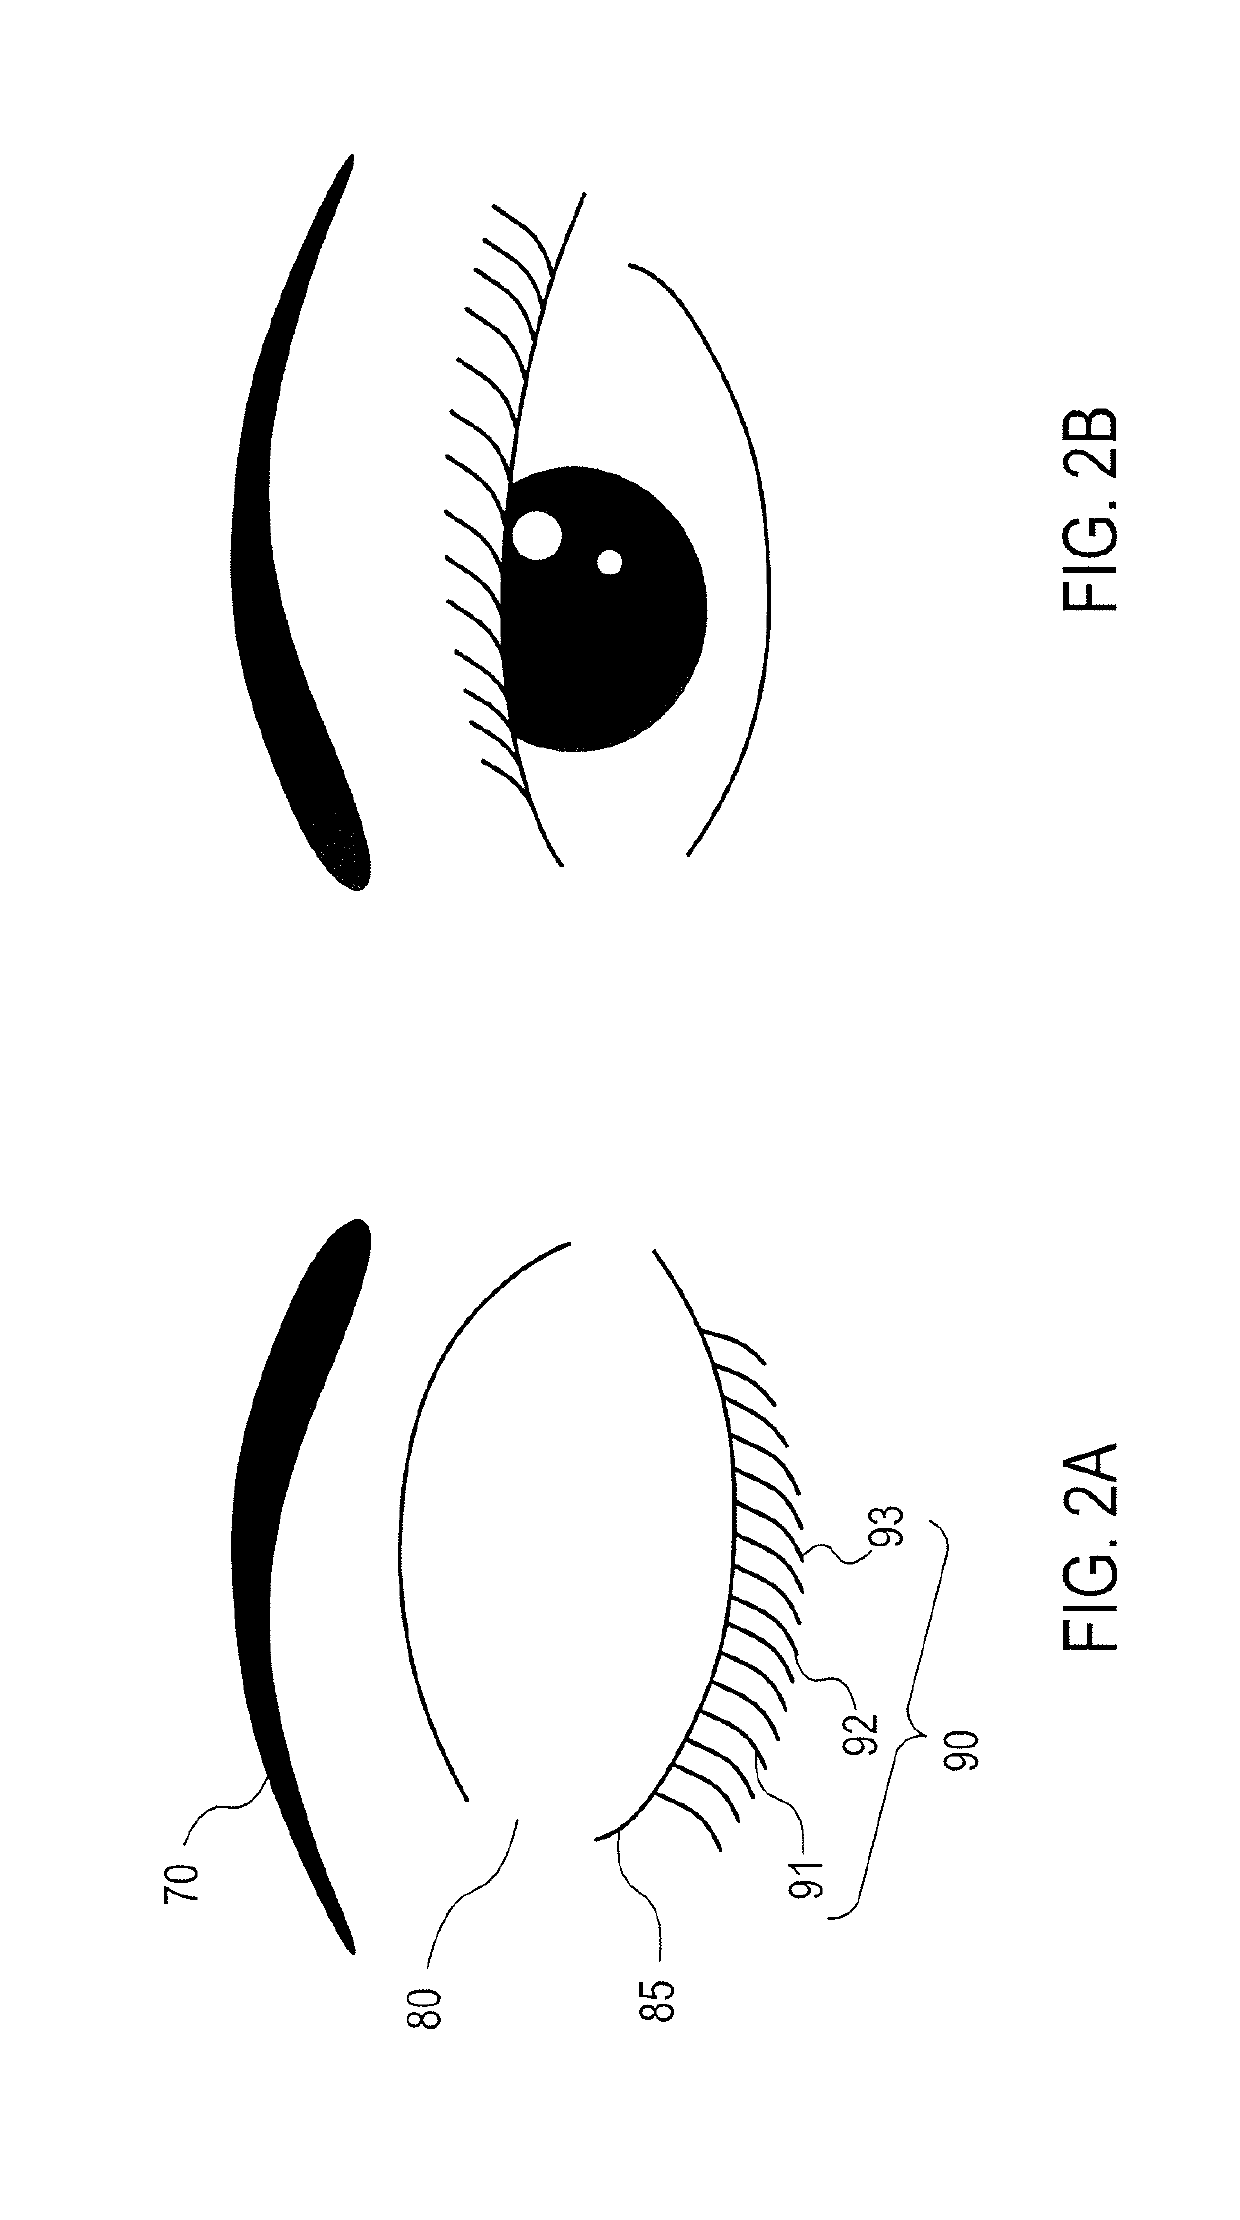 Magnetically attachable eyelash prosthetic system and related methods